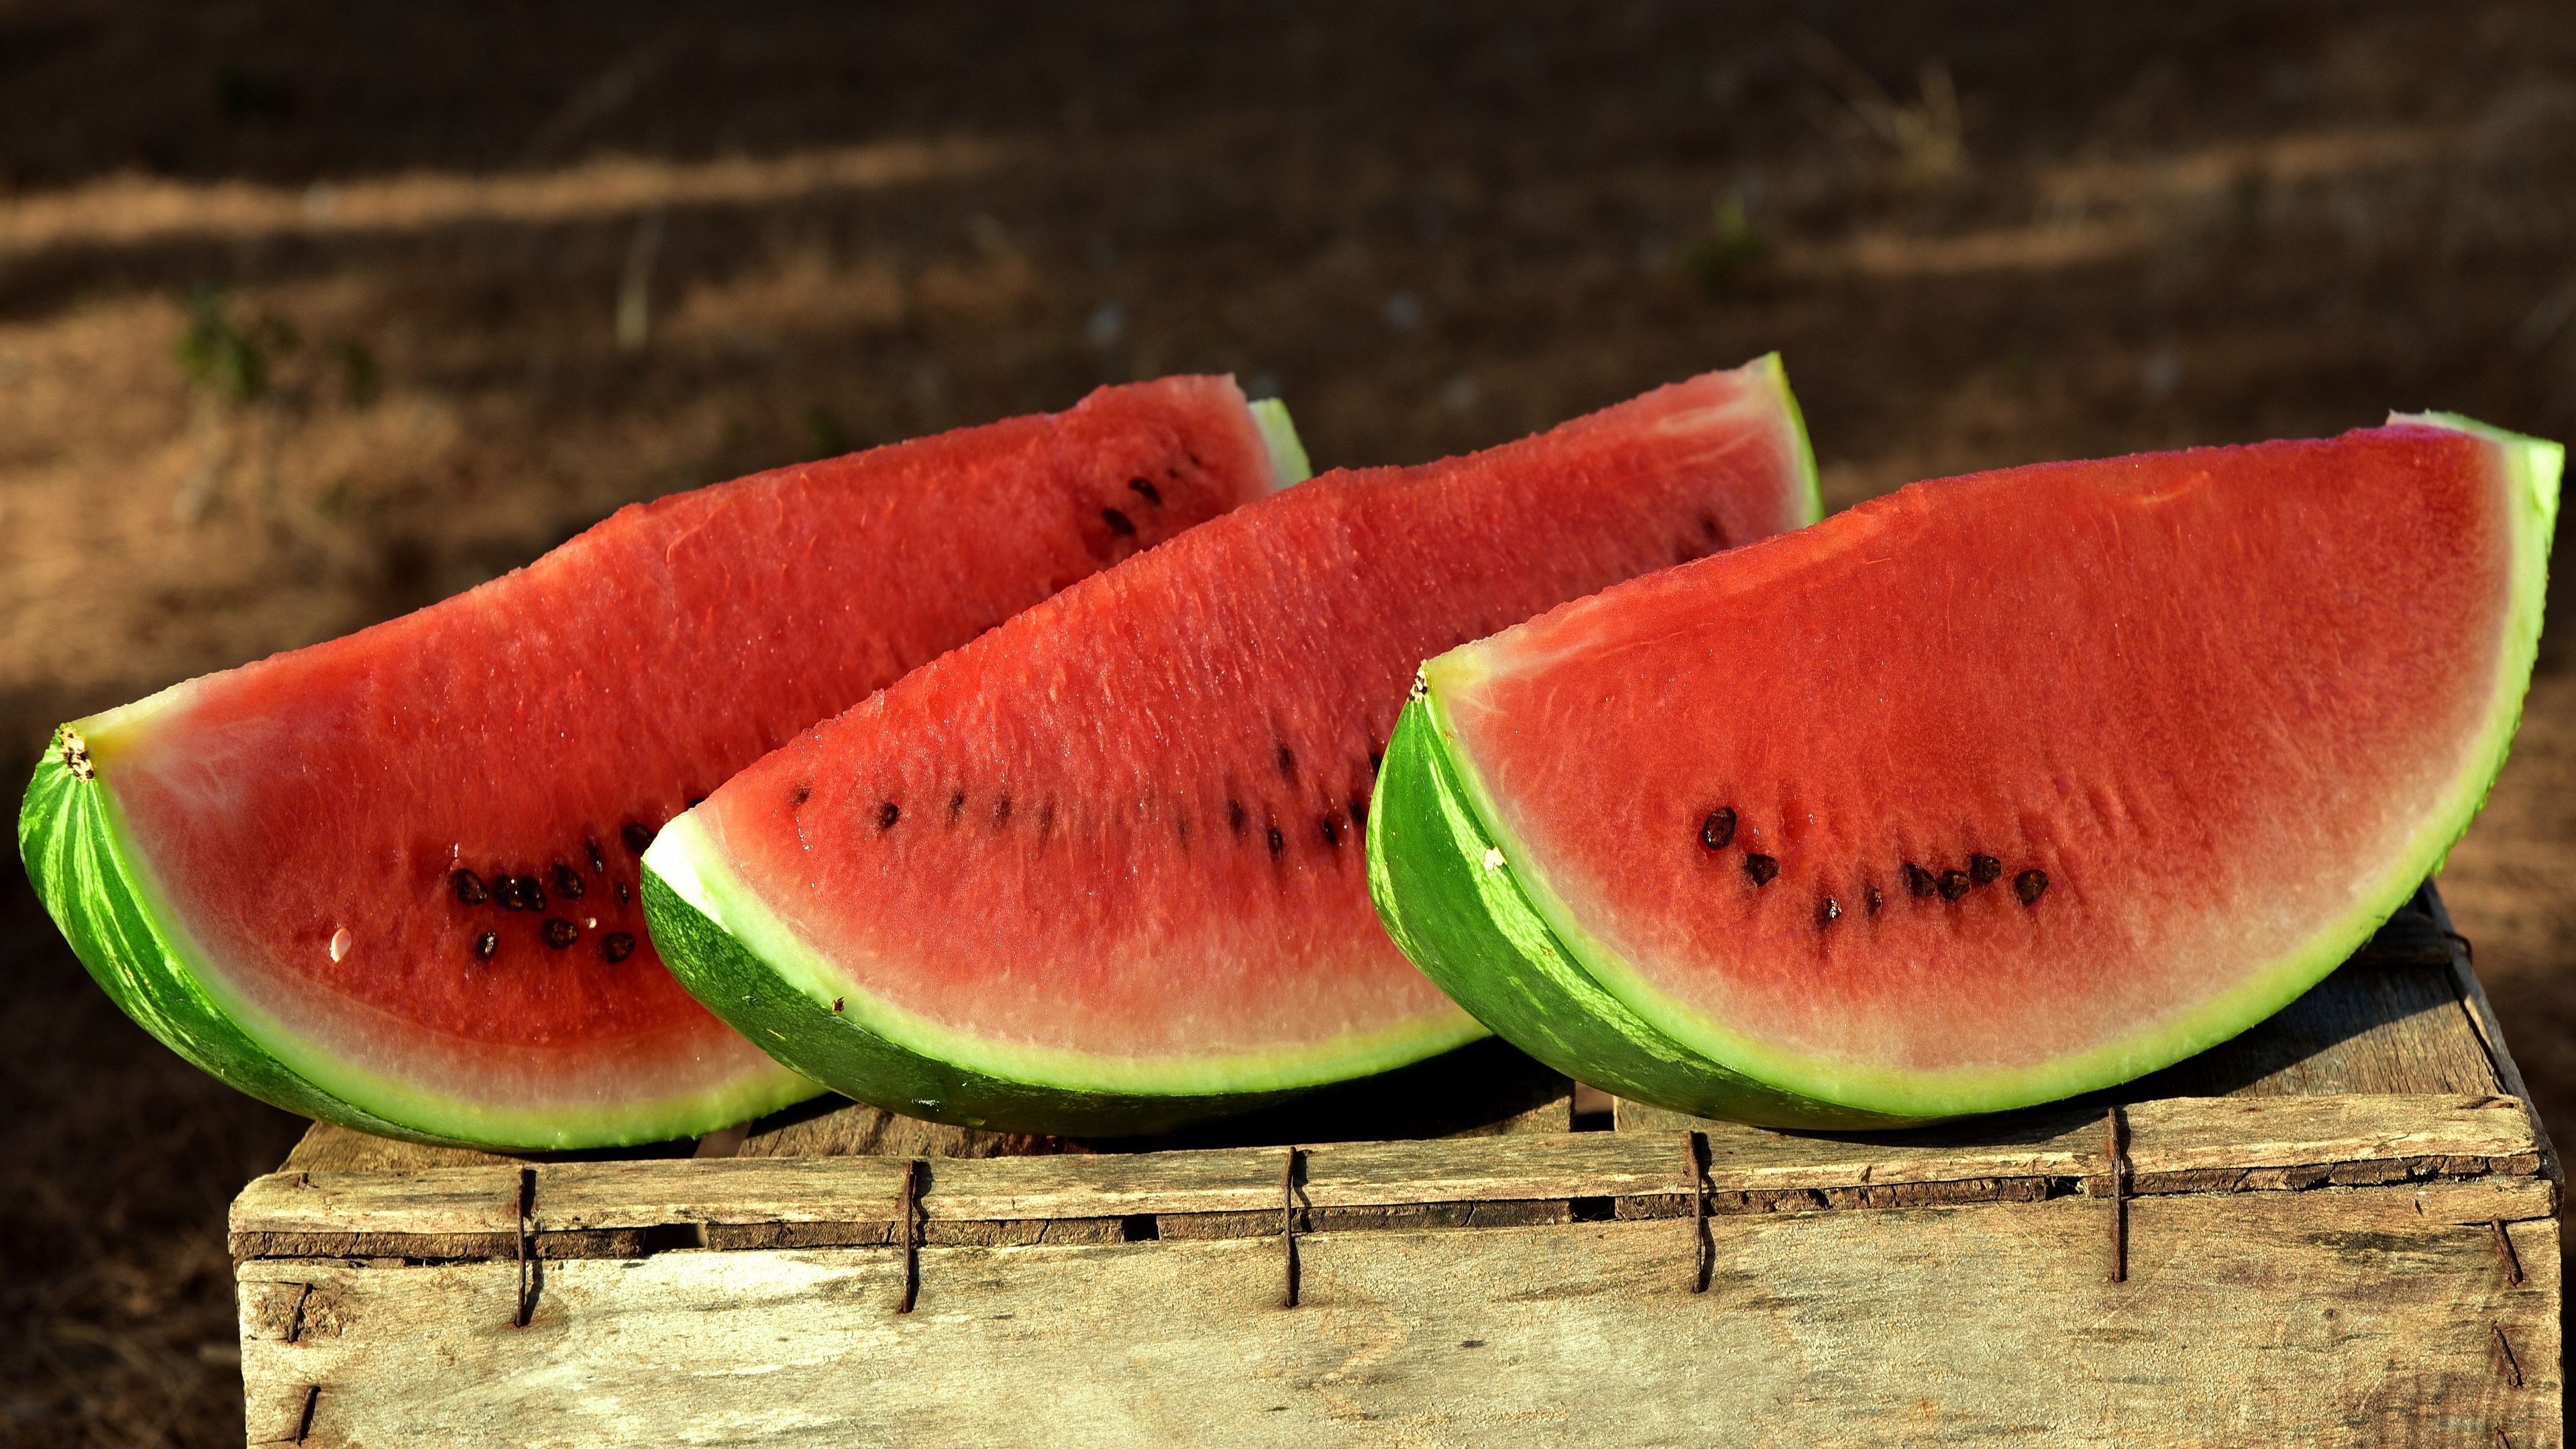 Watermelon: A berry with a hard rind and no internal divisions. 3840x2160 4K Wallpaper.